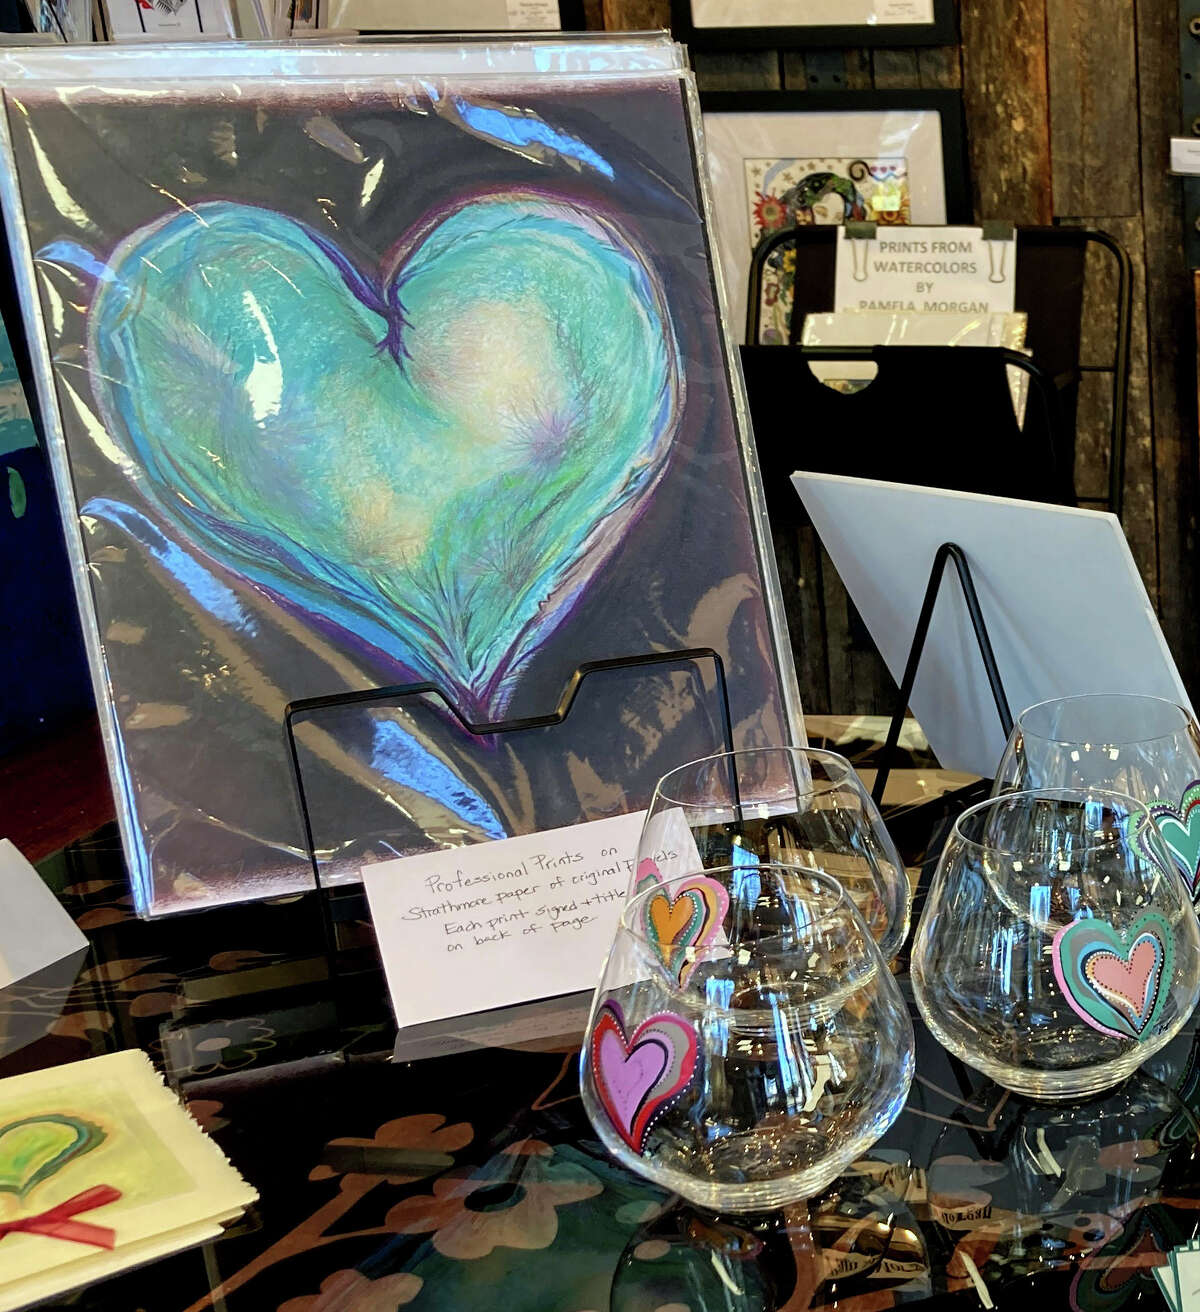 One-of-a-kind paintings, drawings, prints, photography, textiles, ceramics, jewelry, and artist-created Valentines cards will be featured.